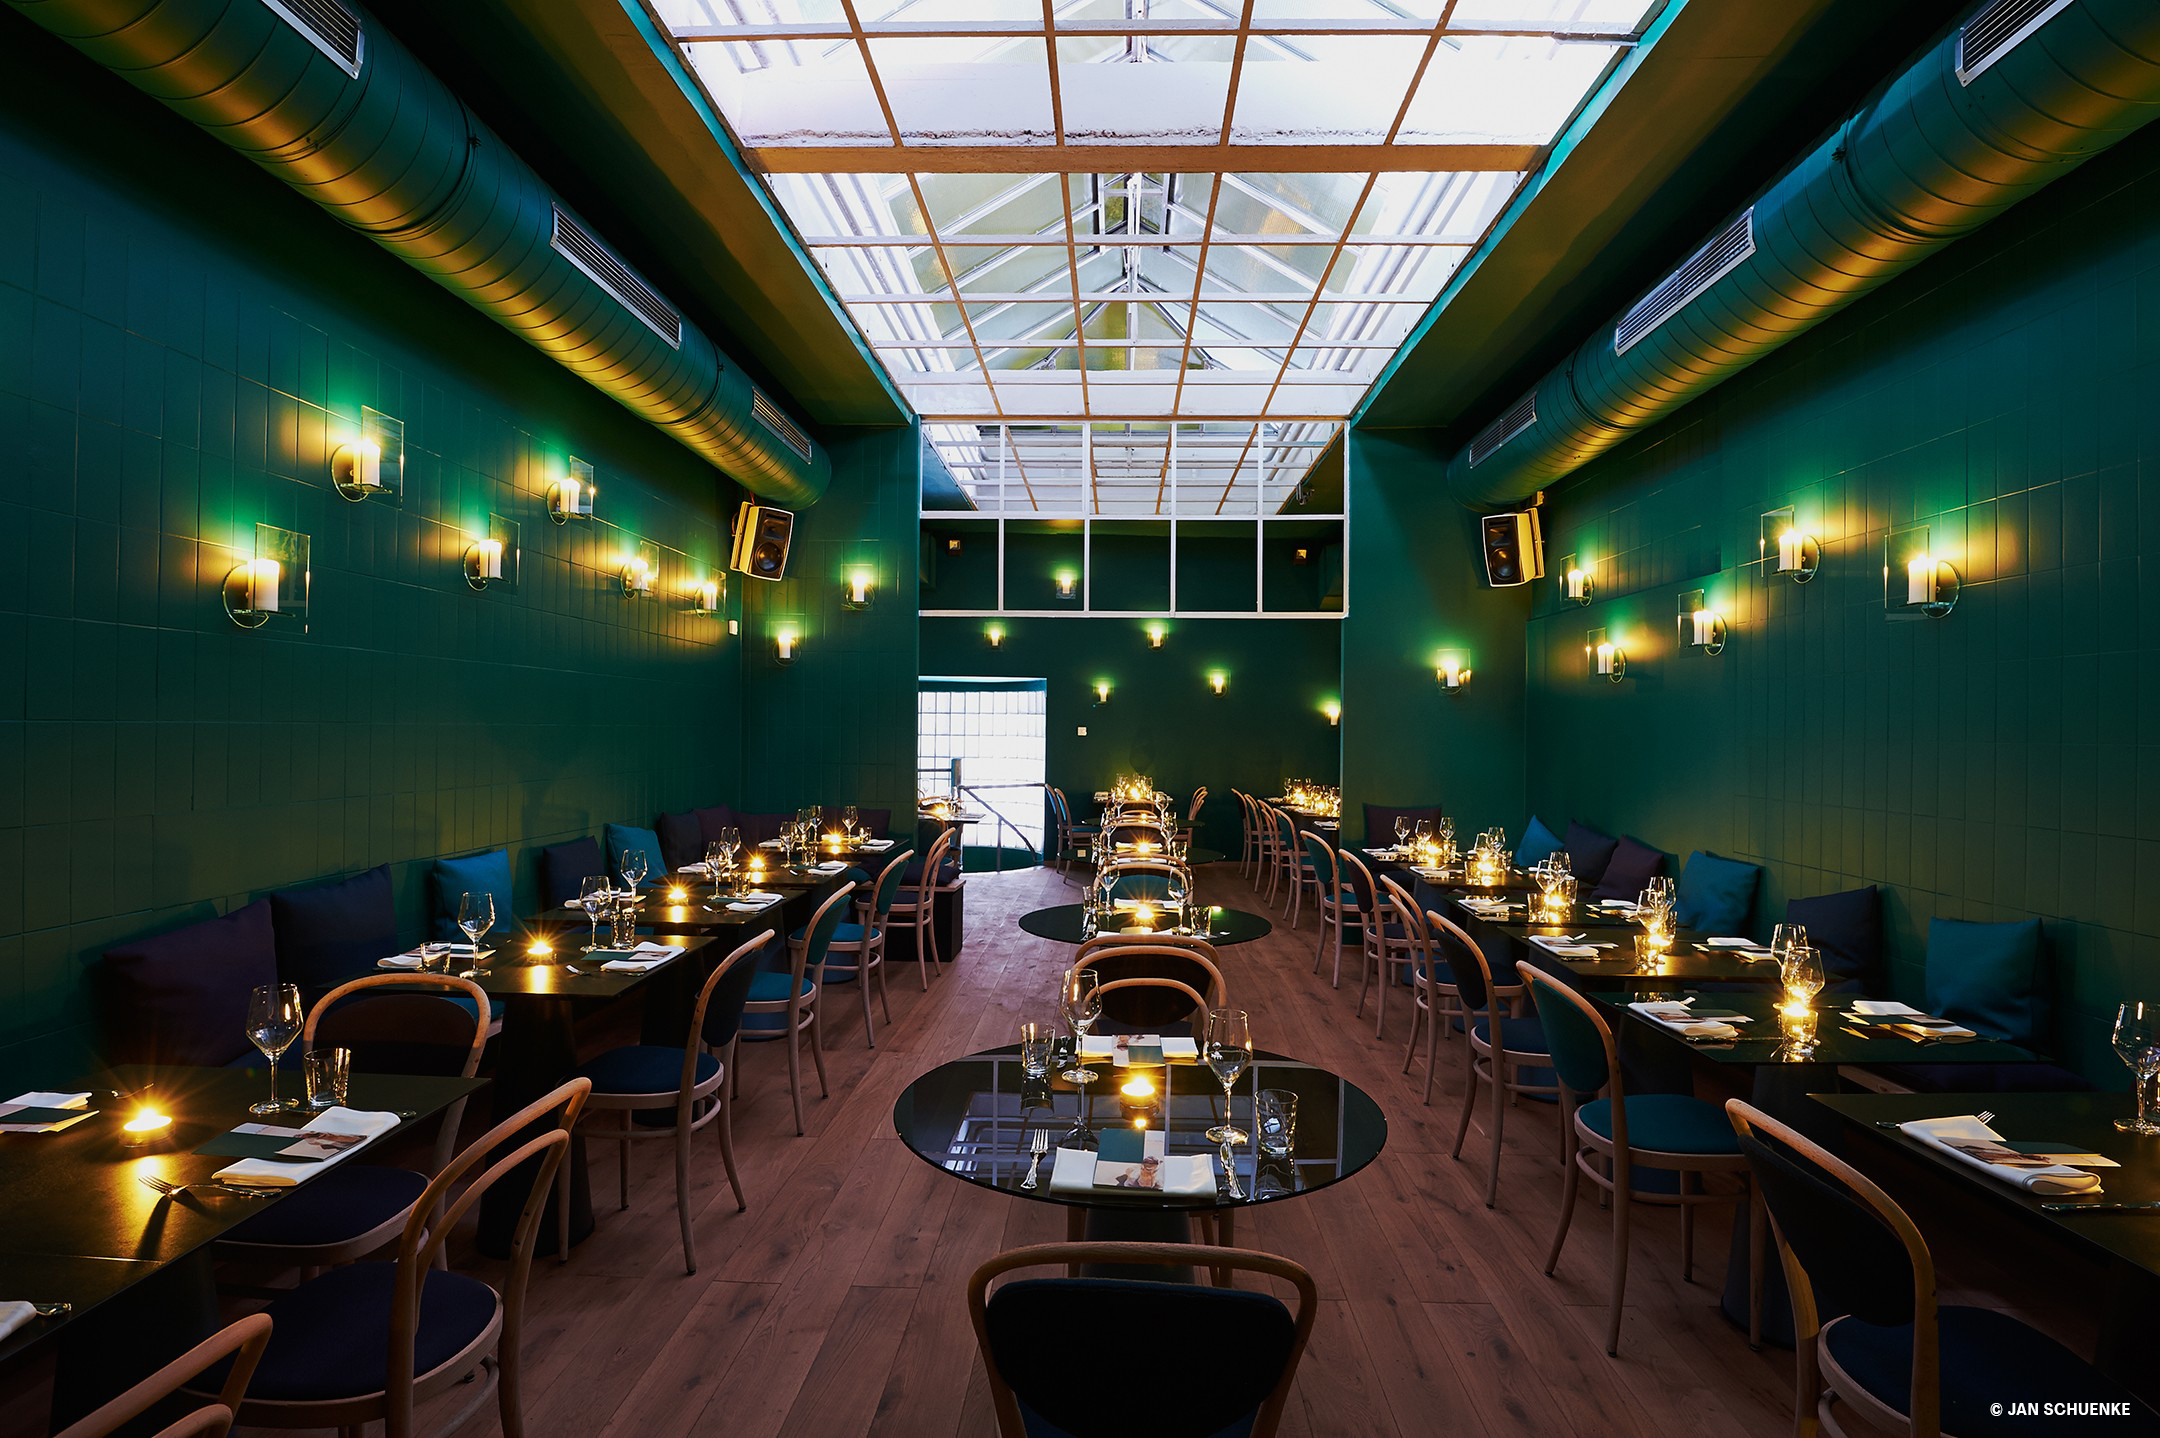 Set dark tables and wooden chairs in a noble-looking restaurant decorated in inky colours